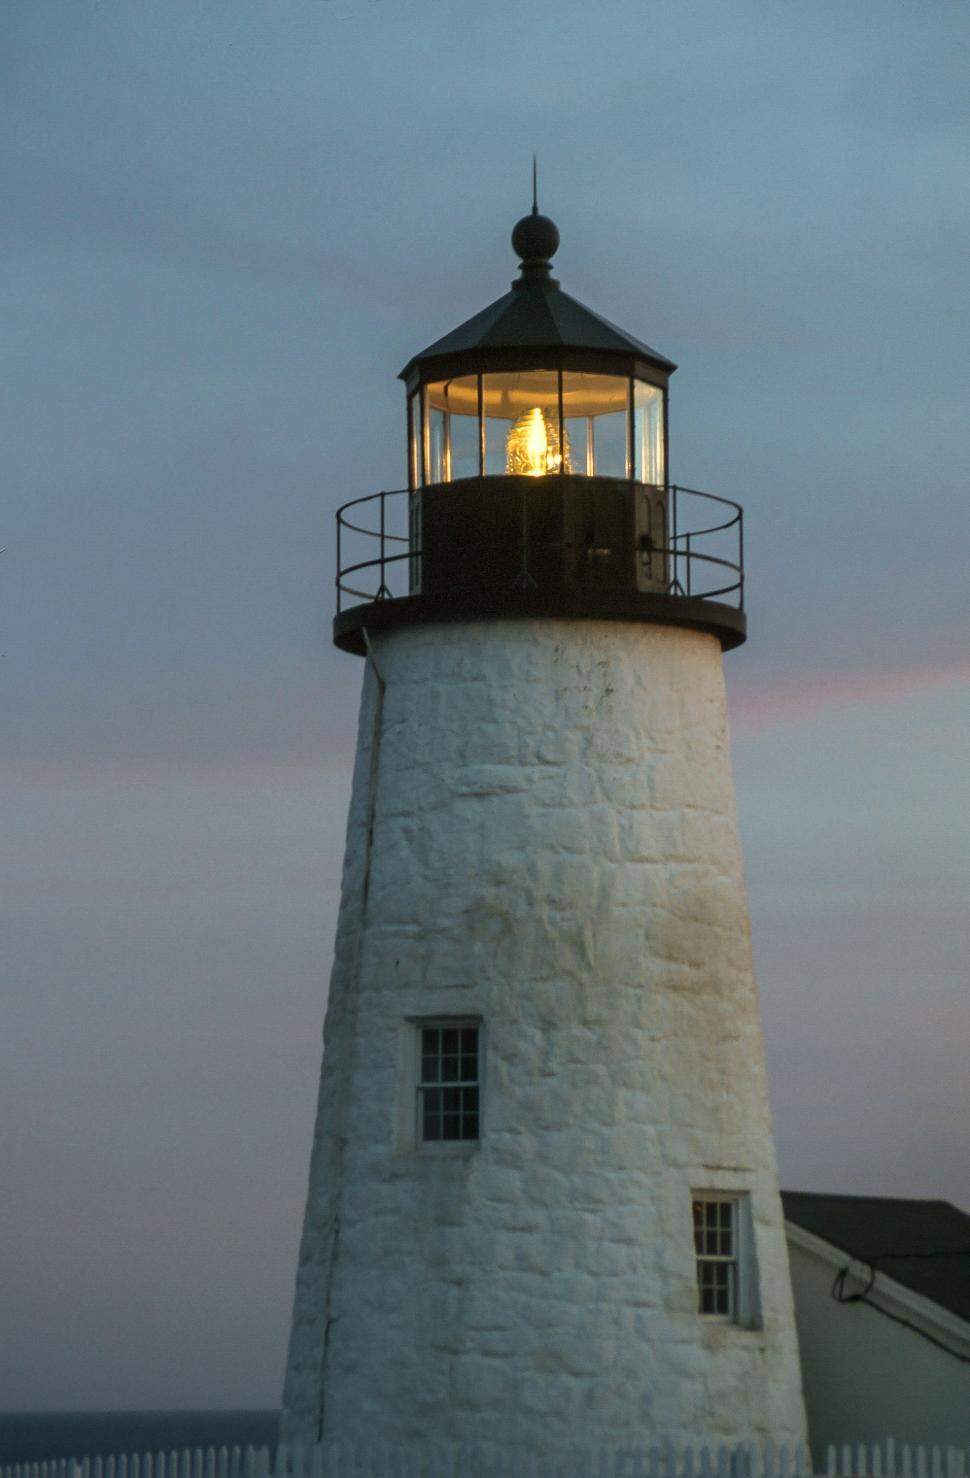 Download Free Stock Photo of Pemaquid Point Lighthouse in Bristol, Maine 